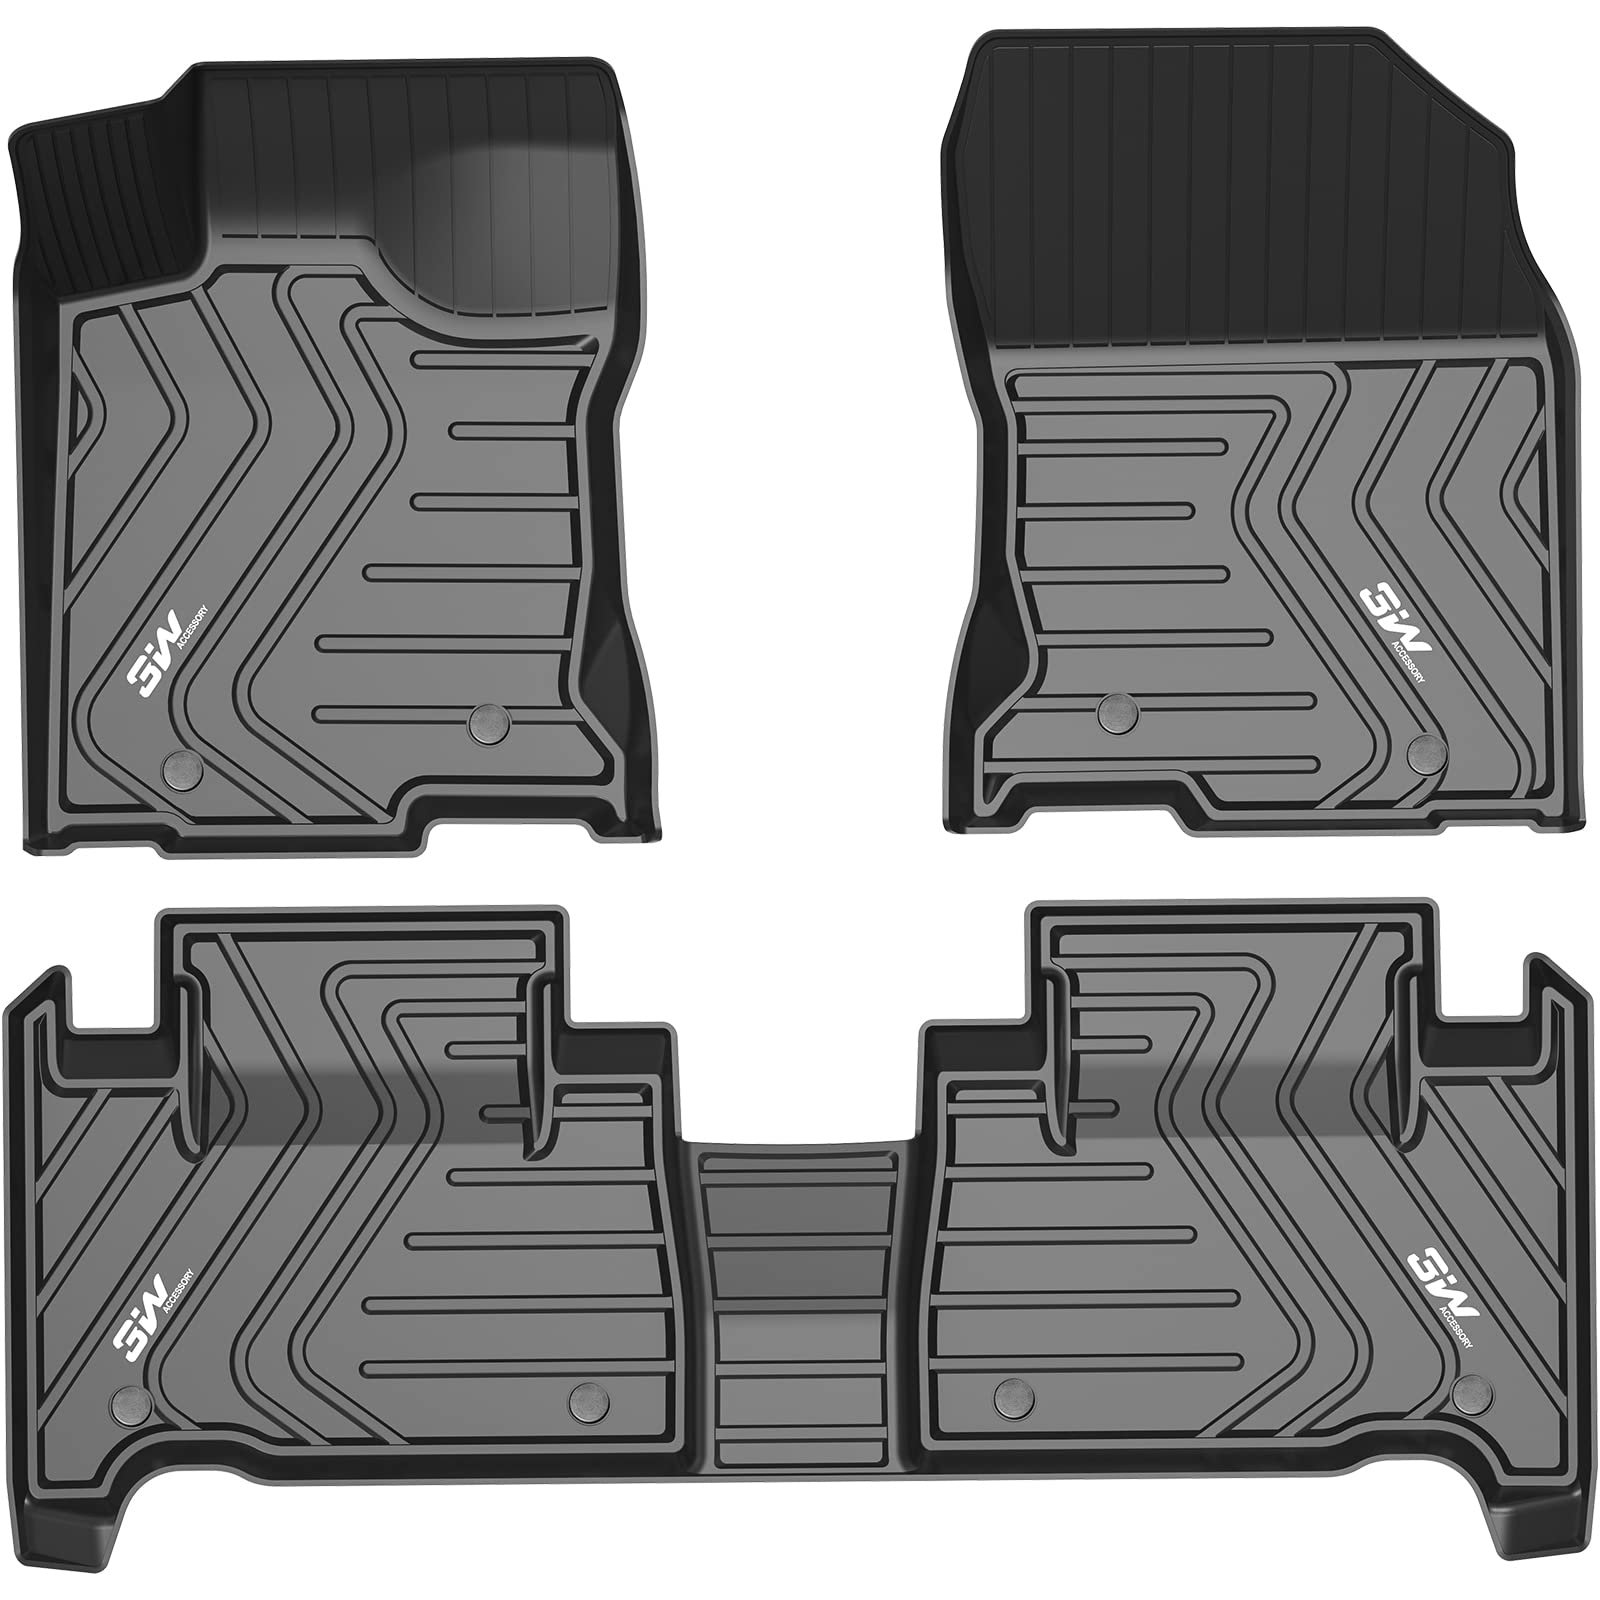 3W LEXUS NX 2015-2021 (NX200t/NX300/NX300h) Custom Floor Mats TPE Material & All-Weather Protection Vehicles & Parts 3w 2015-2021 NX 2015-2021 1st&2nd Row Mats